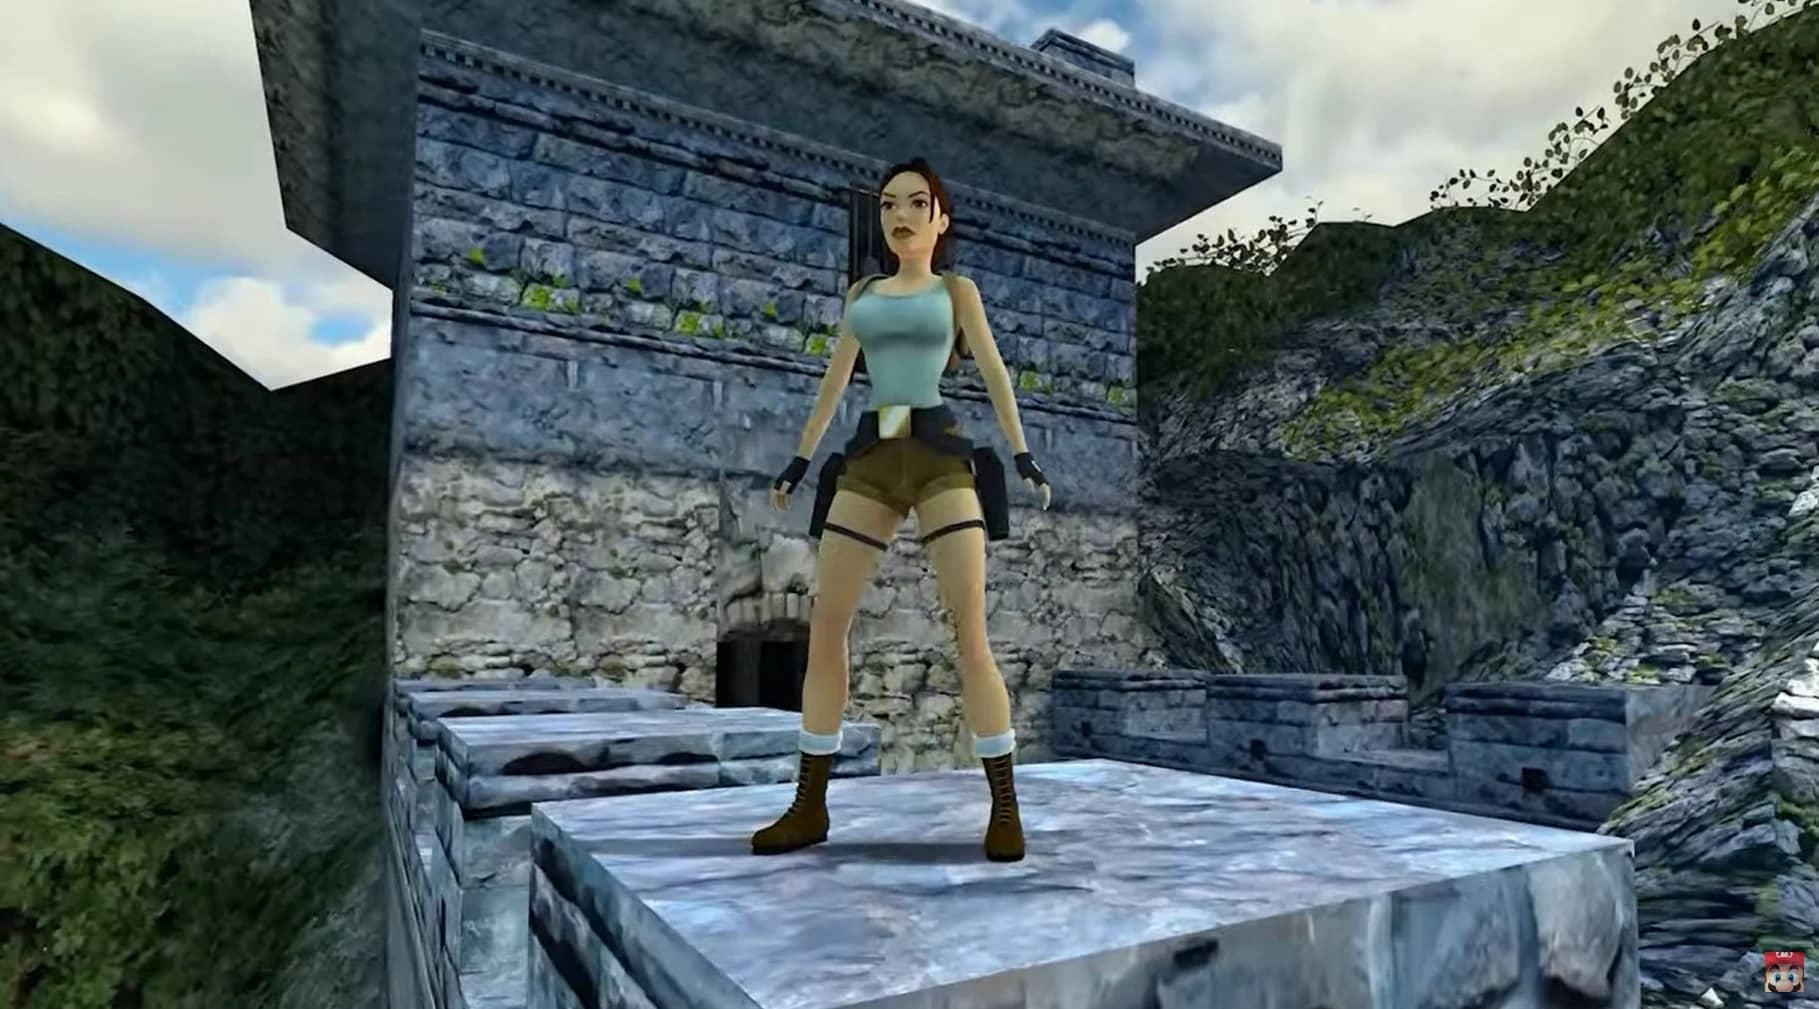 Tomb Raider Remastered original trilogy officially announced